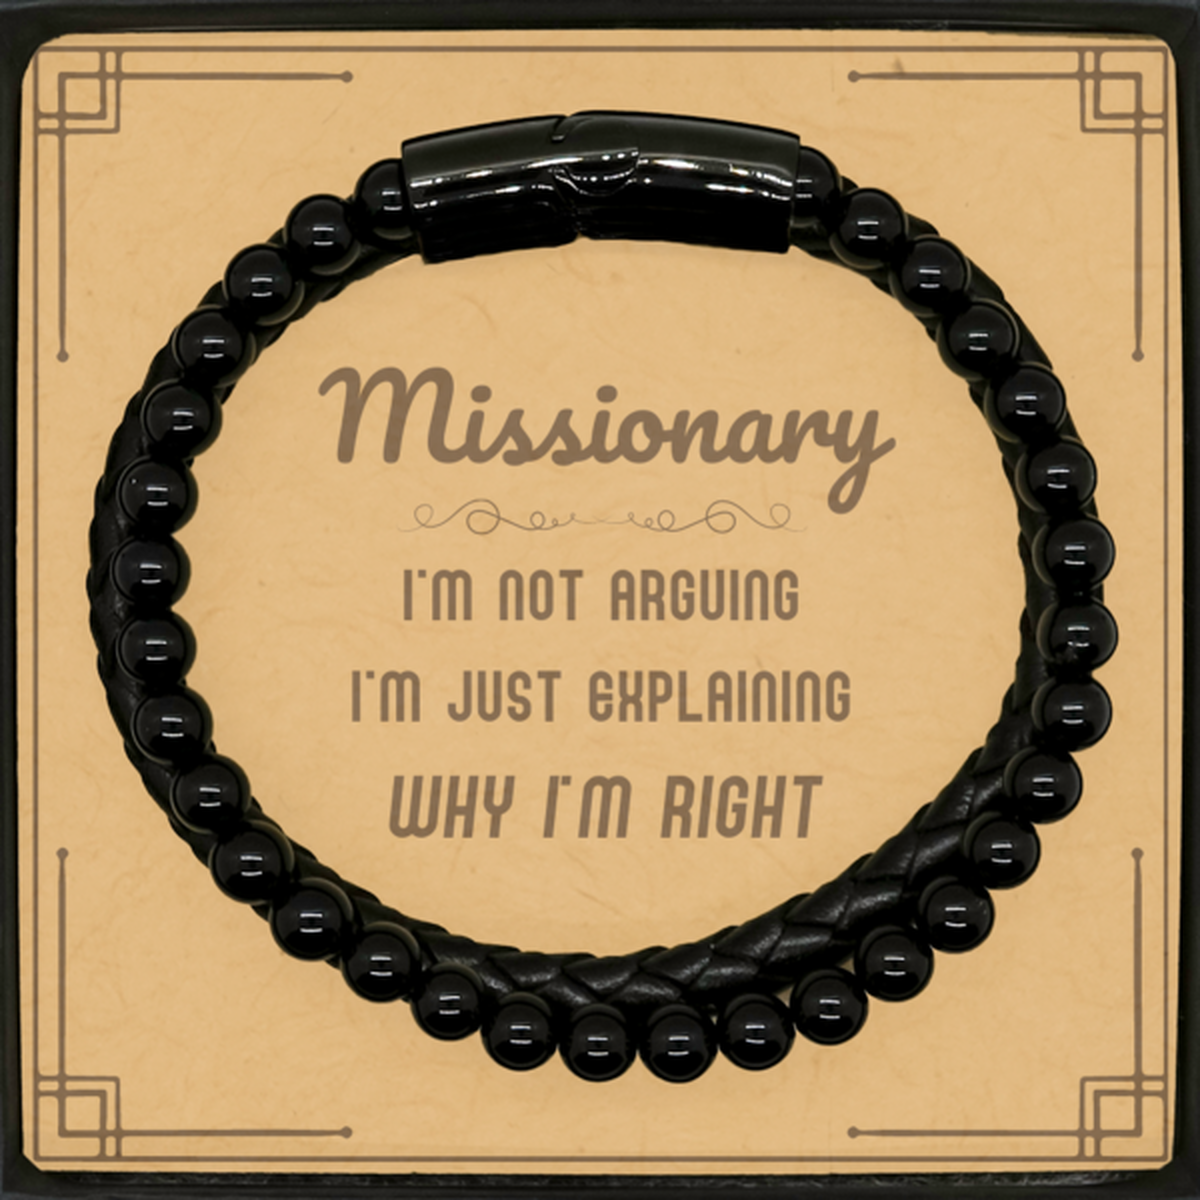 Missionary I'm not Arguing. I'm Just Explaining Why I'm RIGHT Stone Leather Bracelets, Funny Saying Quote Missionary Gifts For Missionary Message Card Graduation Birthday Christmas Gifts for Men Women Coworker